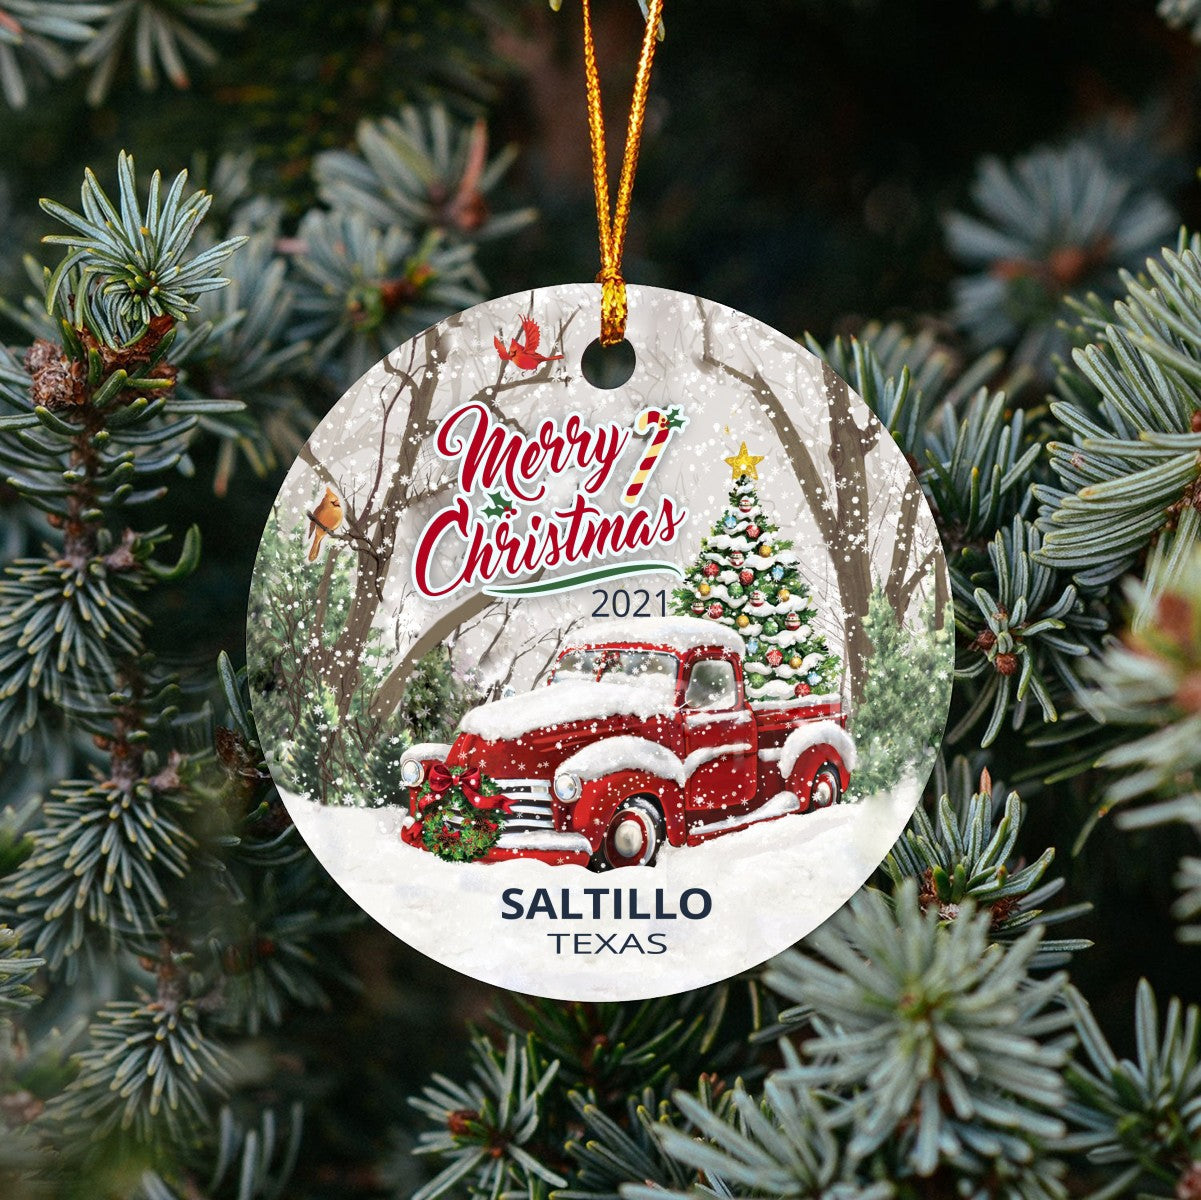 Christmas Tree Ornaments Saltillo - Ornament With Name City, State Saltillo Texas TX Ornament - Red Truck Xmas Ornaments 3'' Plastic Gift For Family, Friend And Housewarming